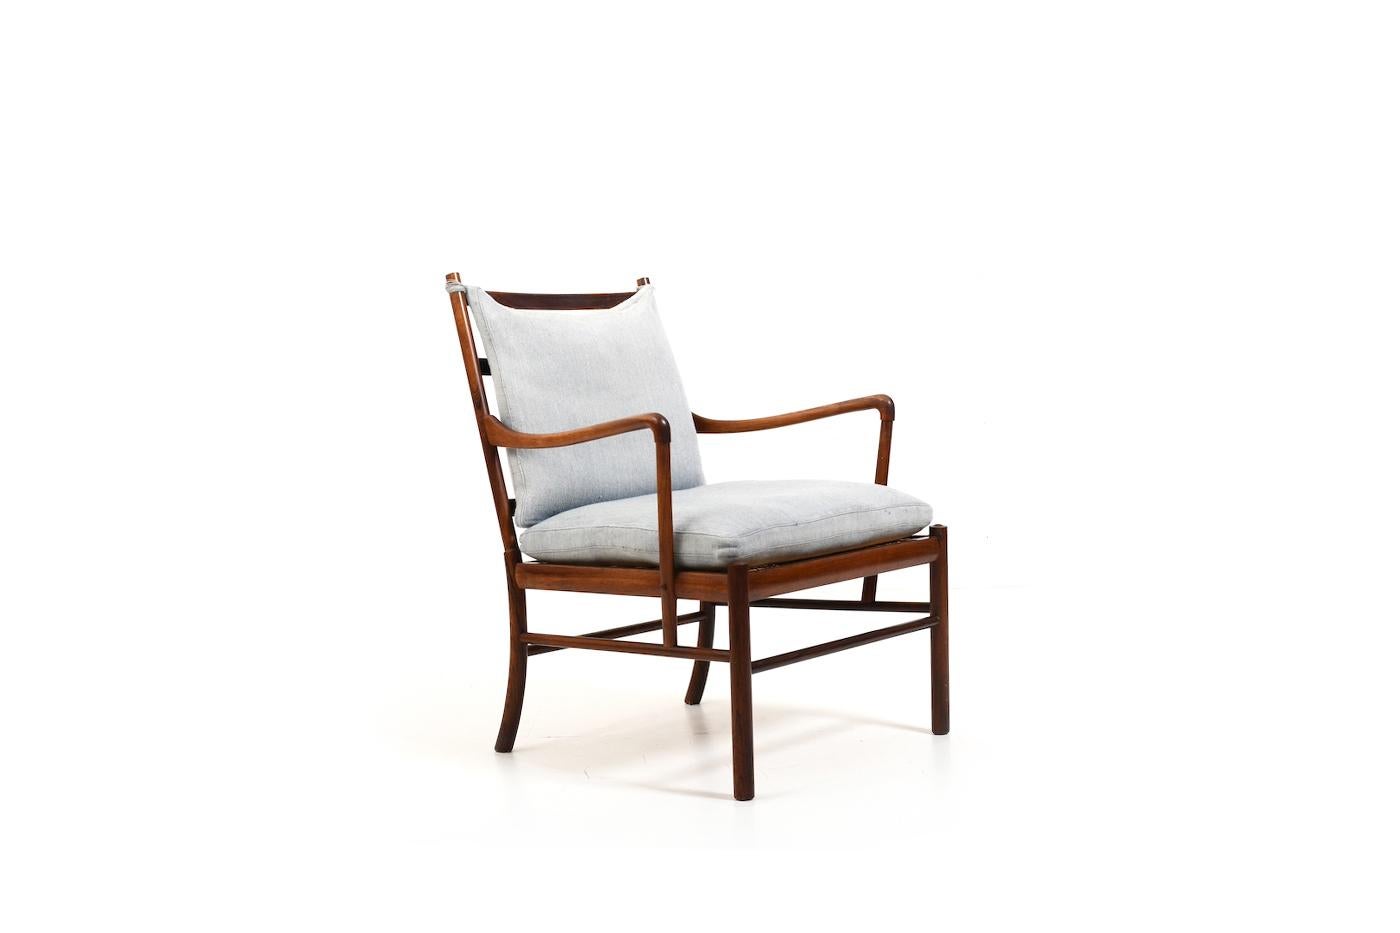 Vintage „Colonial Chair“ by Ole Wanscher for Poul Jeppesen 1949. Model PJ-149.  Produced in 1950s. Made in rosewood and orignial cushions in light blue fabric. All in original condition.